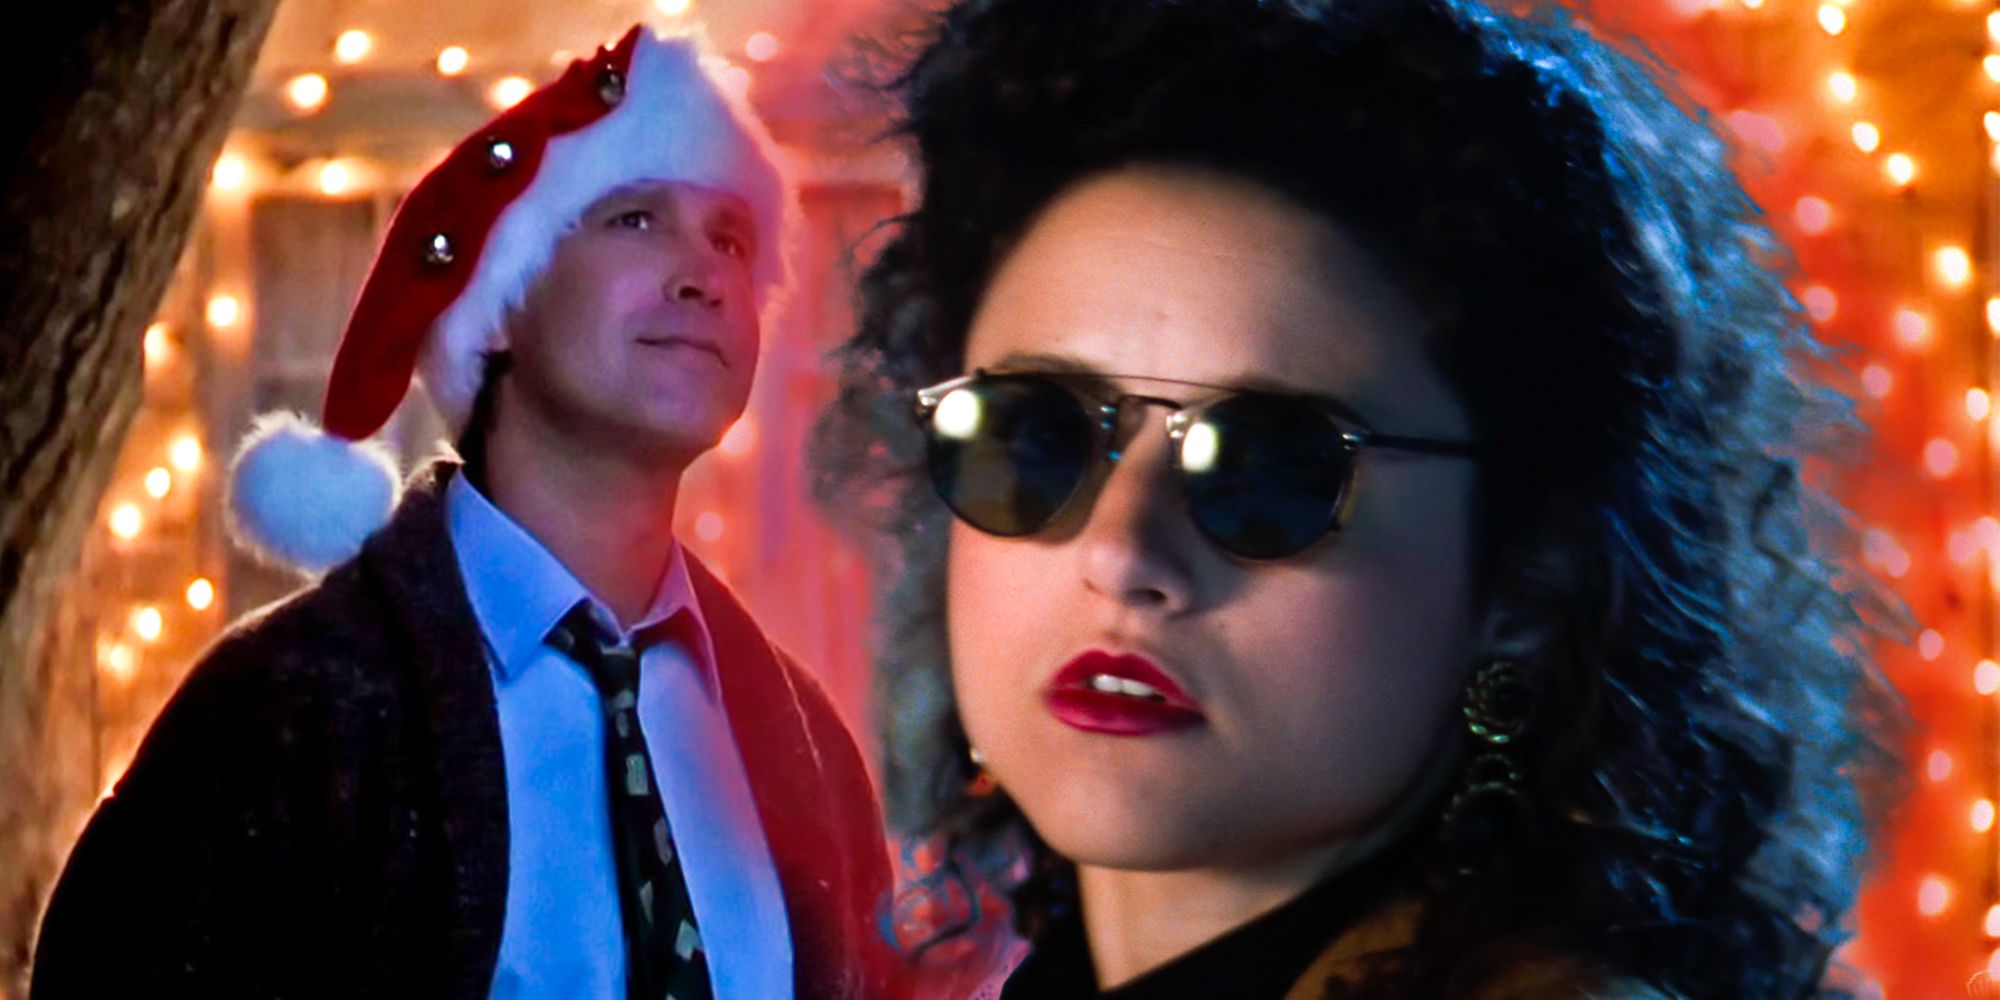 Chevy Chase as Clark Griswold and Julia Louis-Dreyfus as Margo in National Lampoon's Christmas Vacation